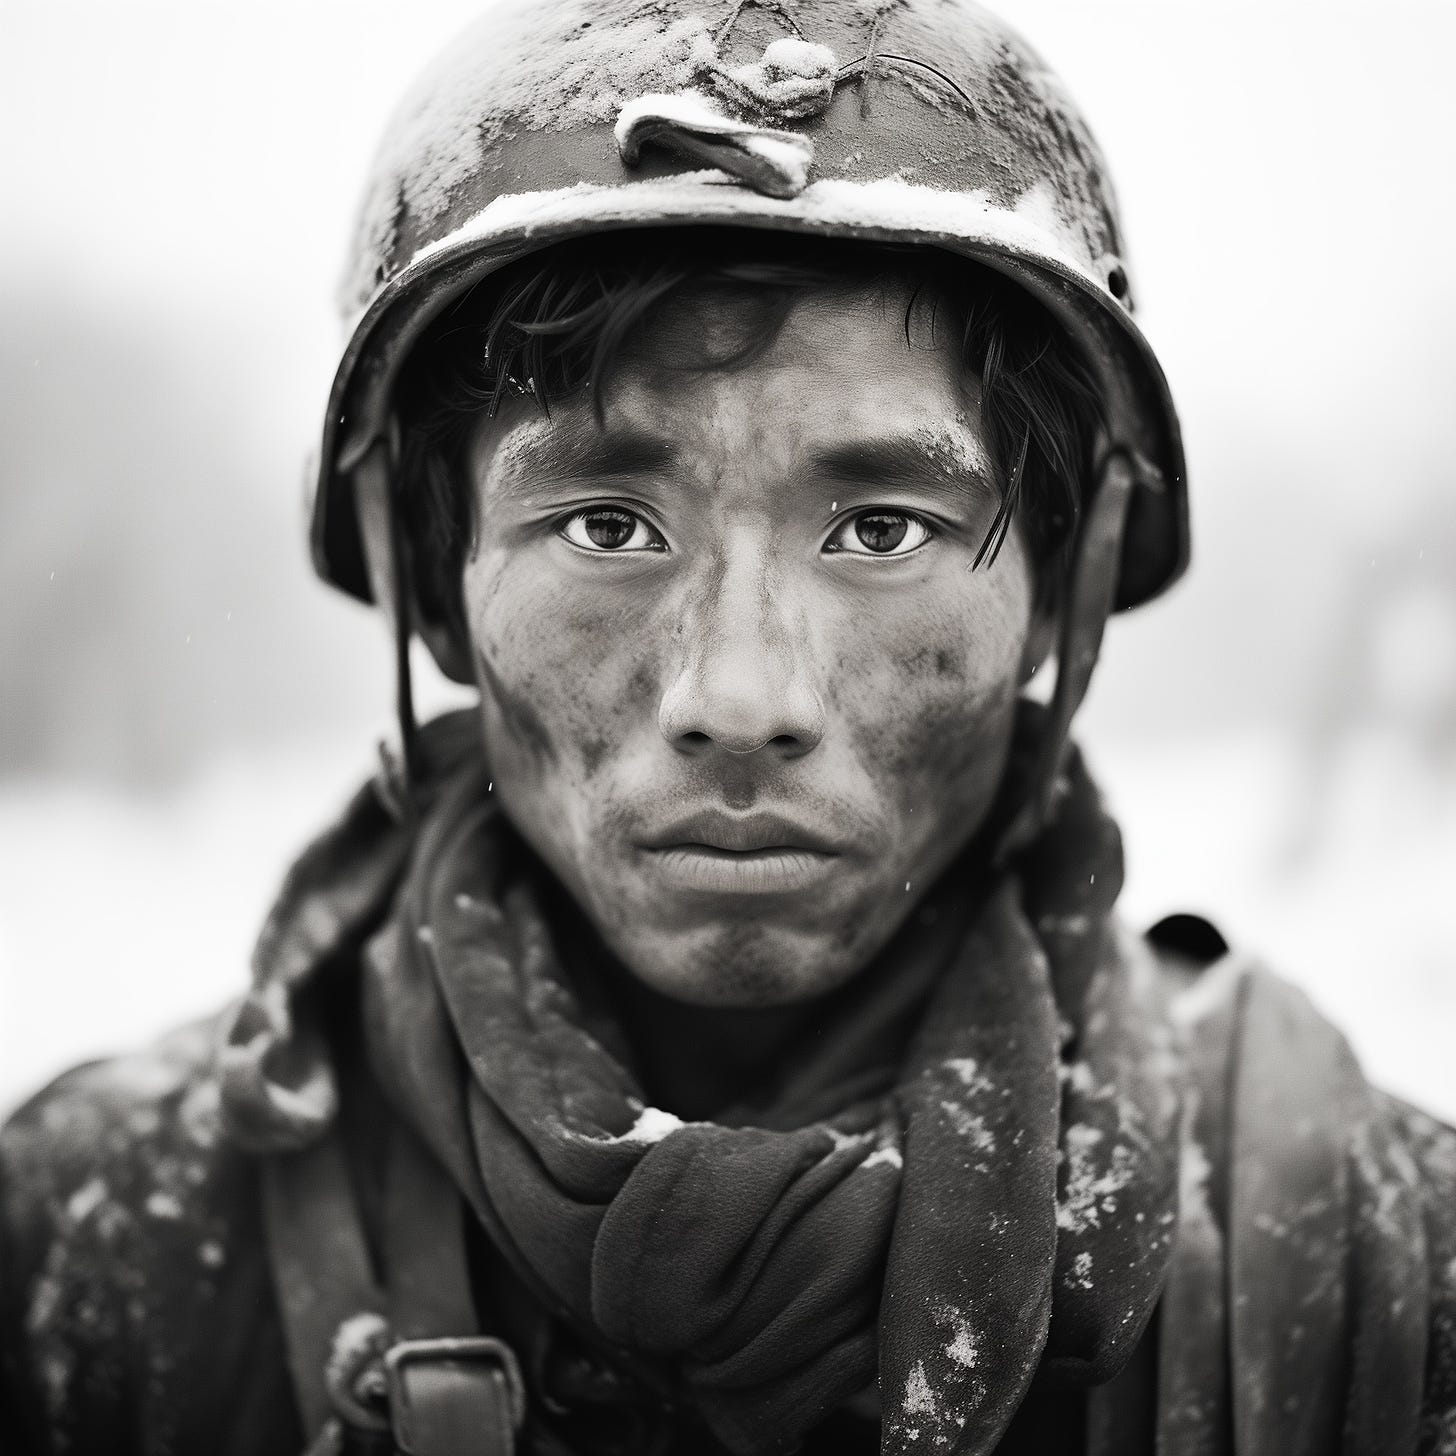 A young Japanese soldier during World War II in Siberia